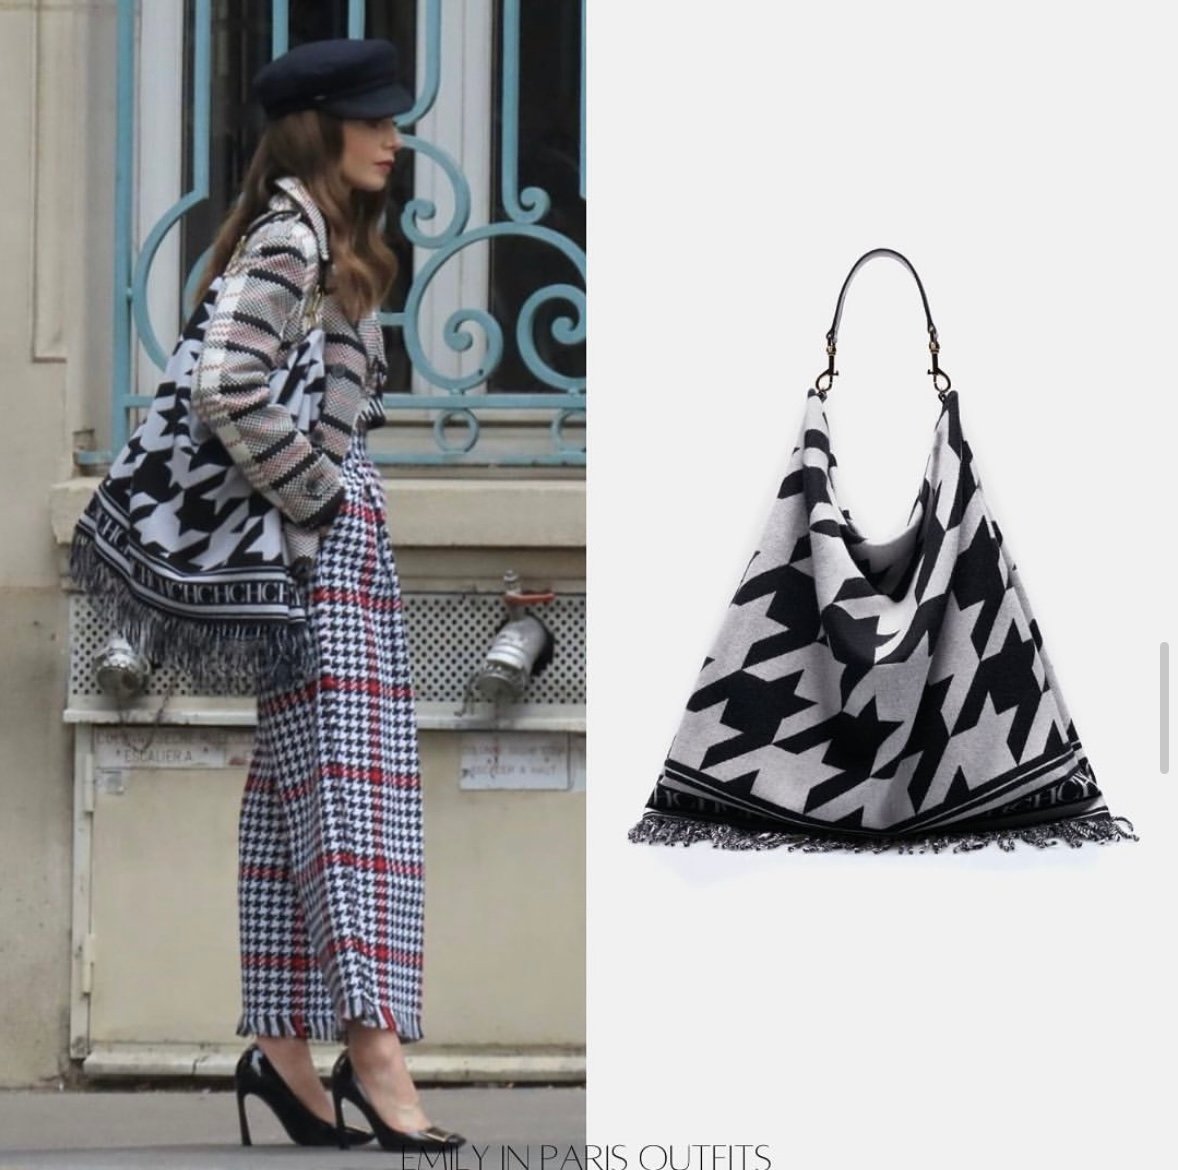 Emily in Paris Season 3 Episode 10, Lily Collins is wearing a Zara checkered jacket, MSGM wide-leg houndstooth trousers, Carolina Herrera Poncho large black and white shoulder bag in Houndstooth print with fringe and Roger Viver trompette pumps. She is wearing a black sailor cap from Galeries Lafayette on the streets of Paris while filming. | Shop the fashion and bags of Emily in Paris Season 3